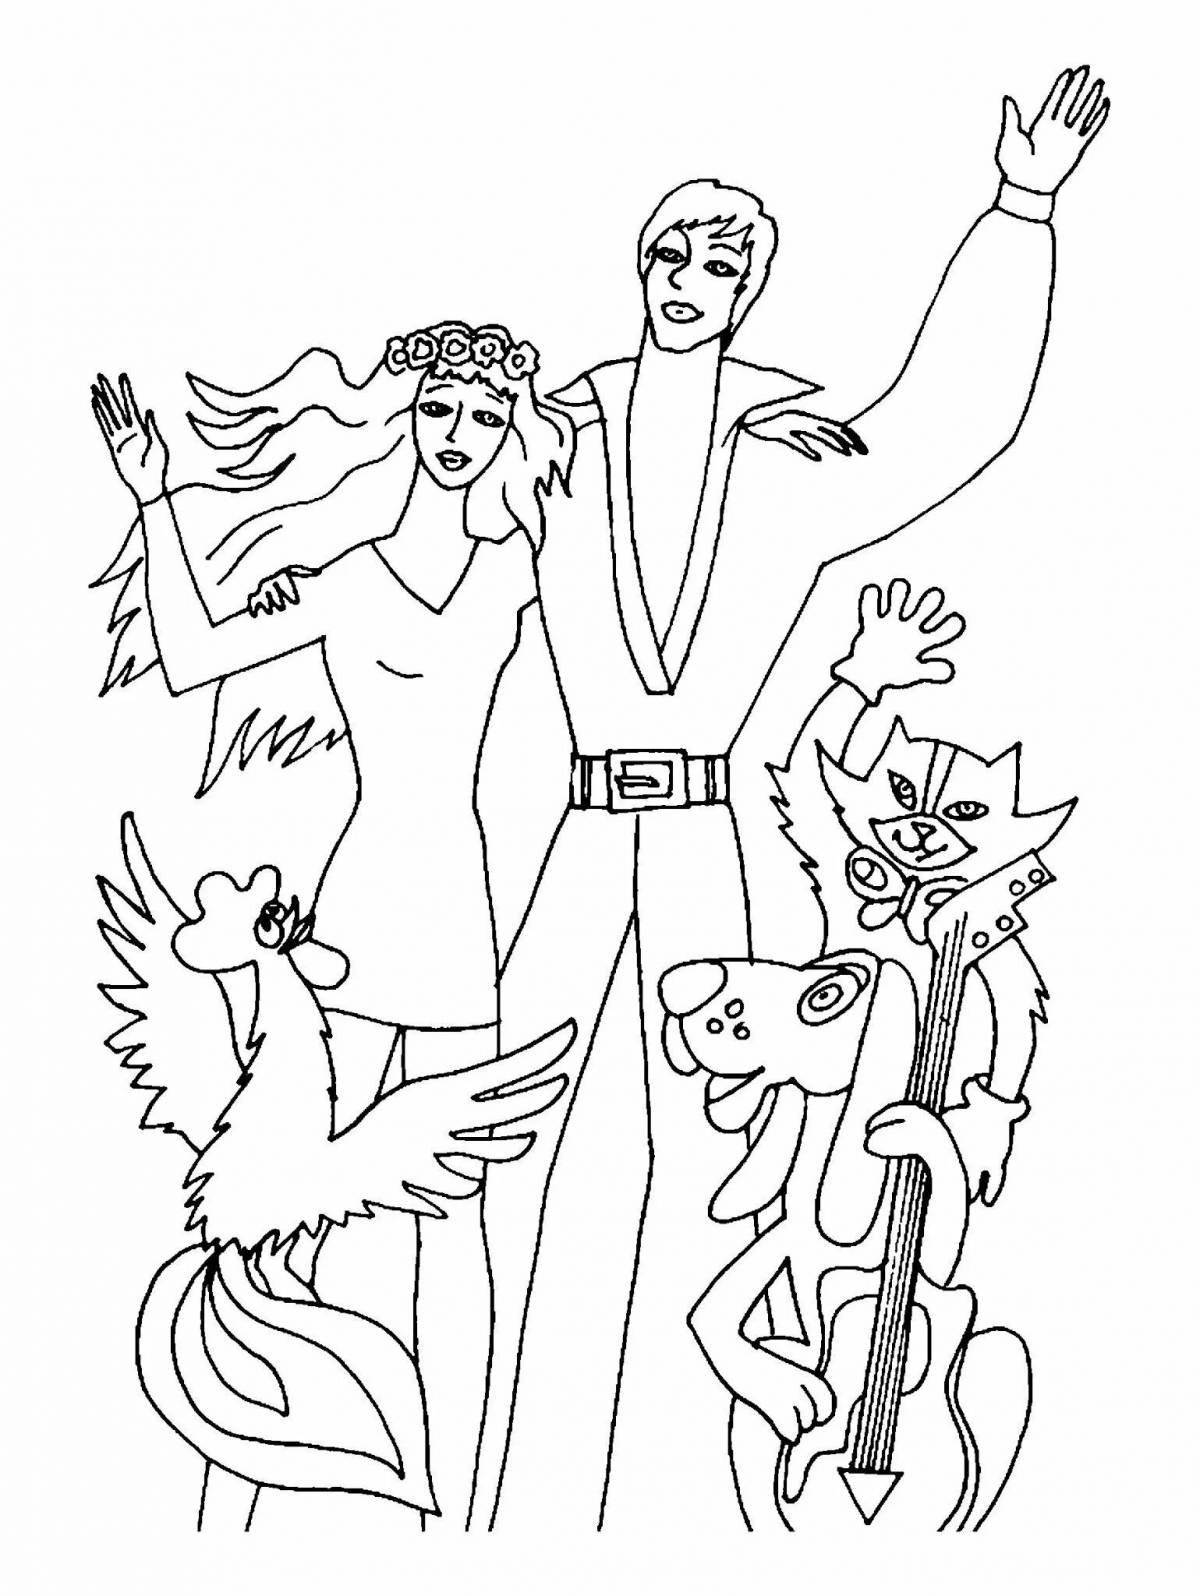 Coloring page charming Bremen town musicians